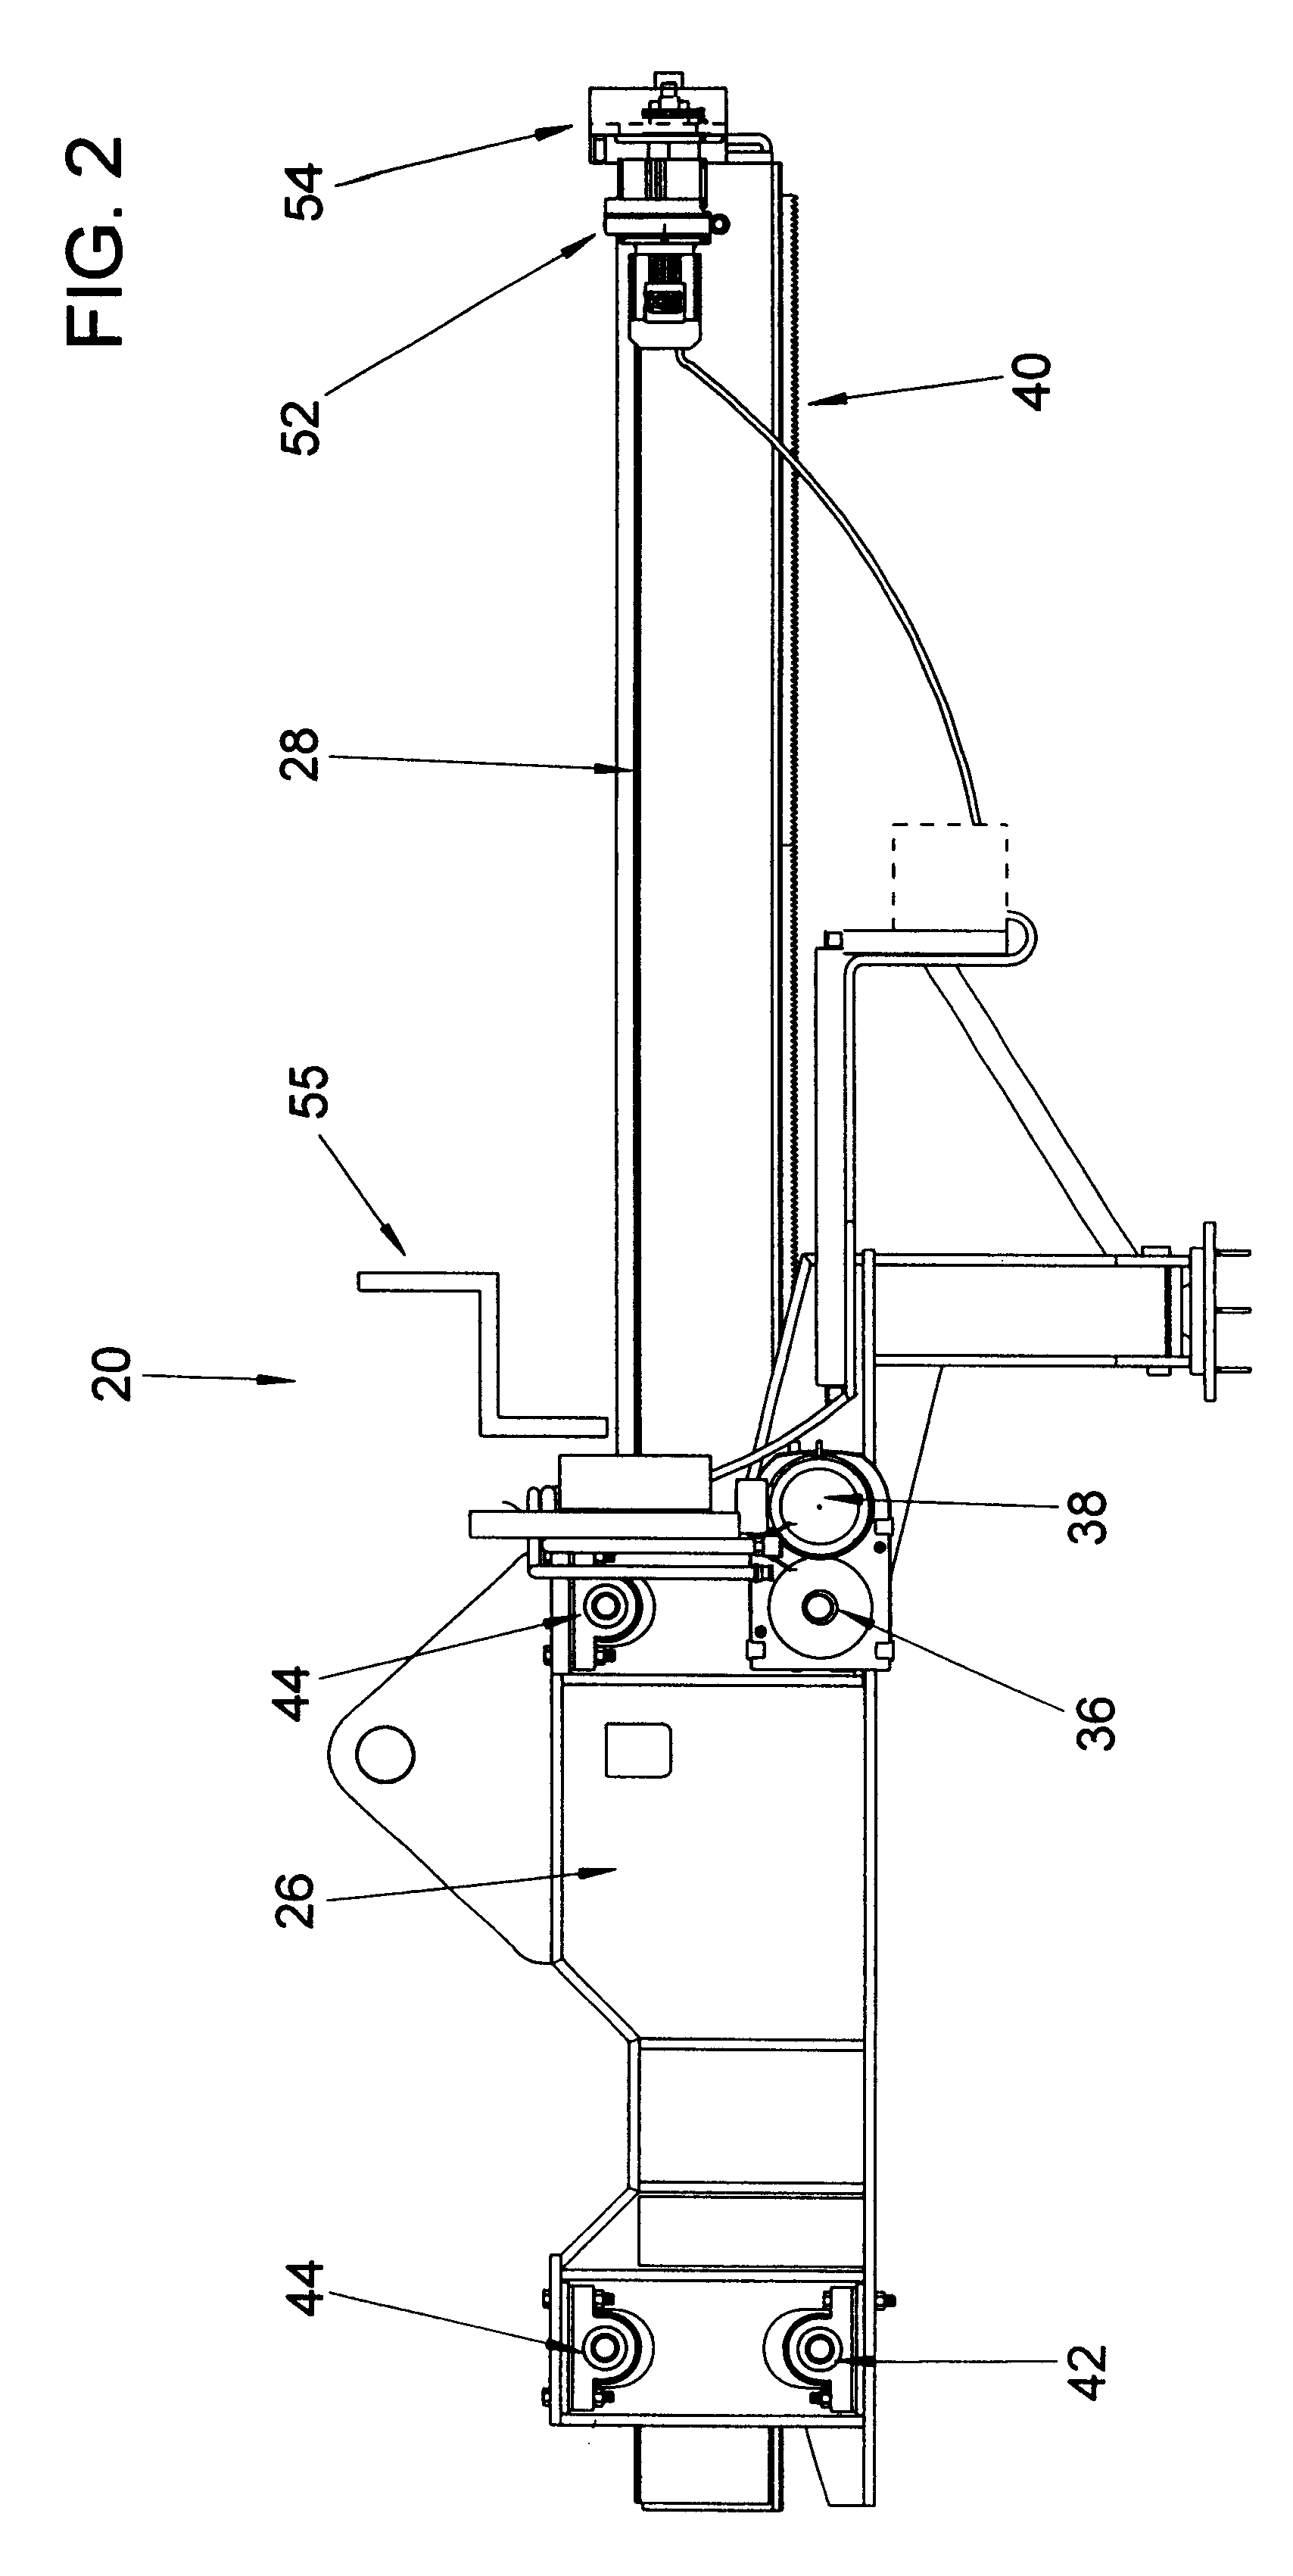 Apparatus for cleaning a coiler furnace drum